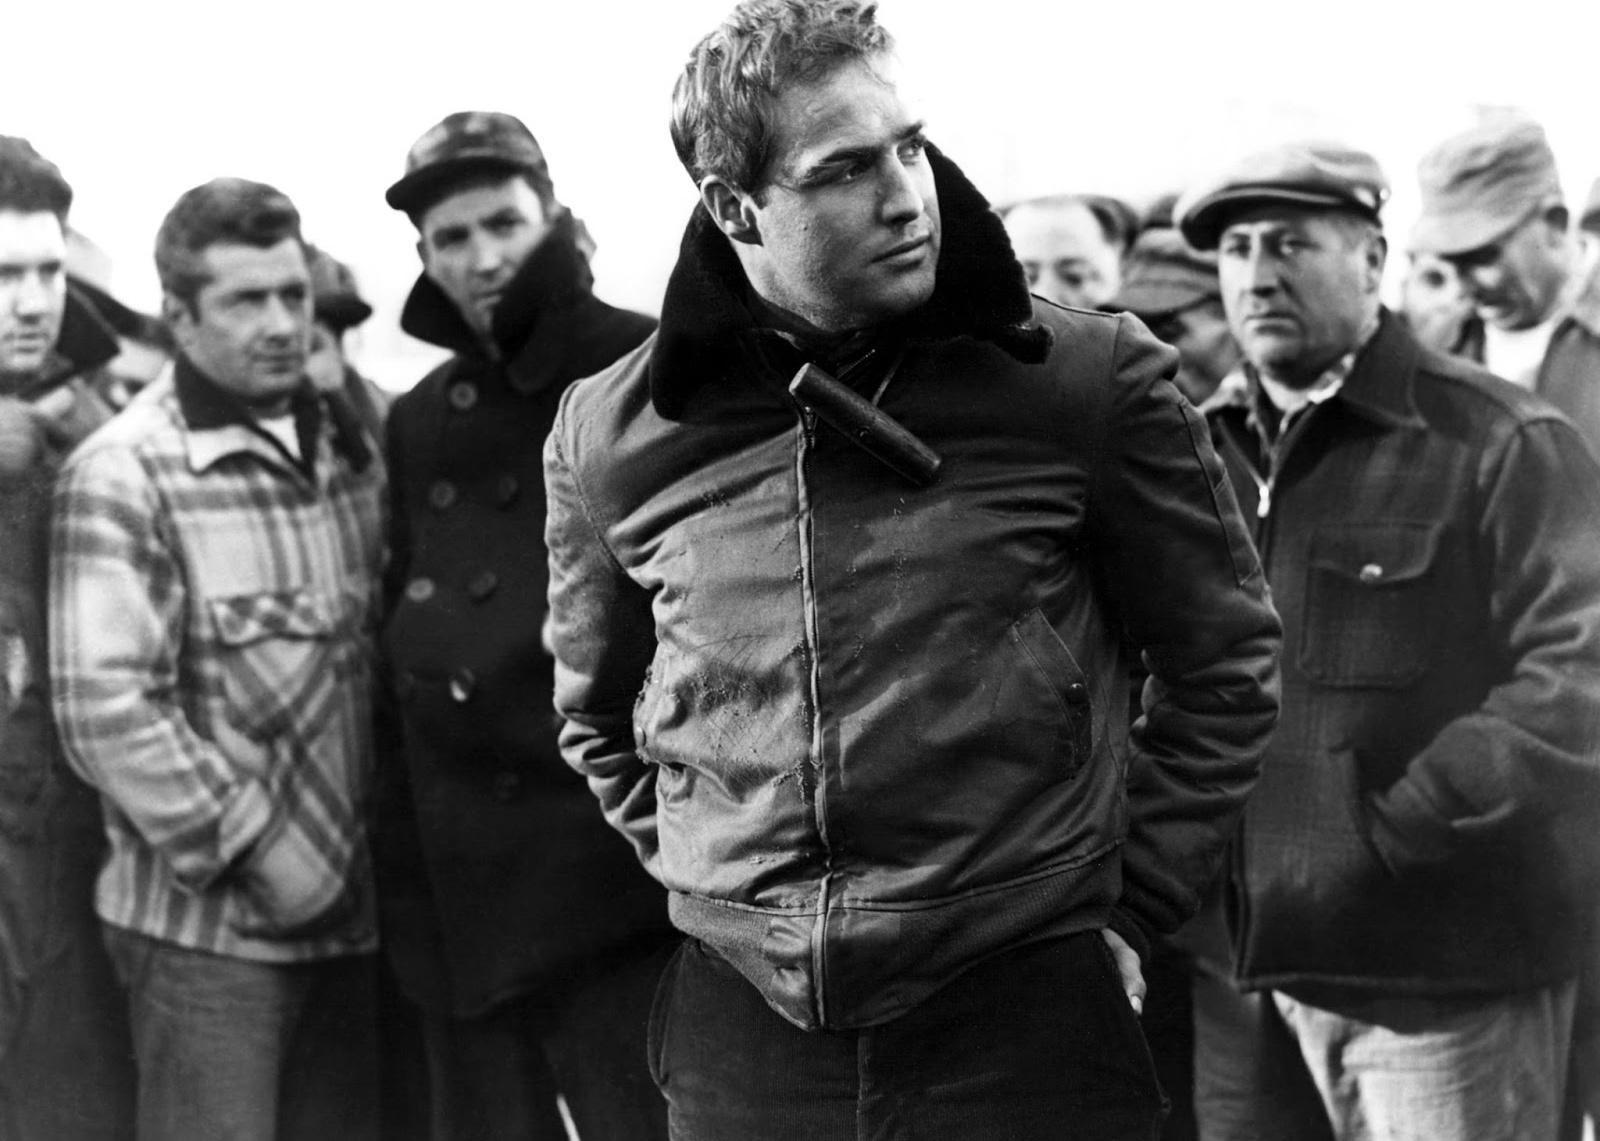 Marlon Brando, wearing a leather jacket, stands in front of a crowd of men.